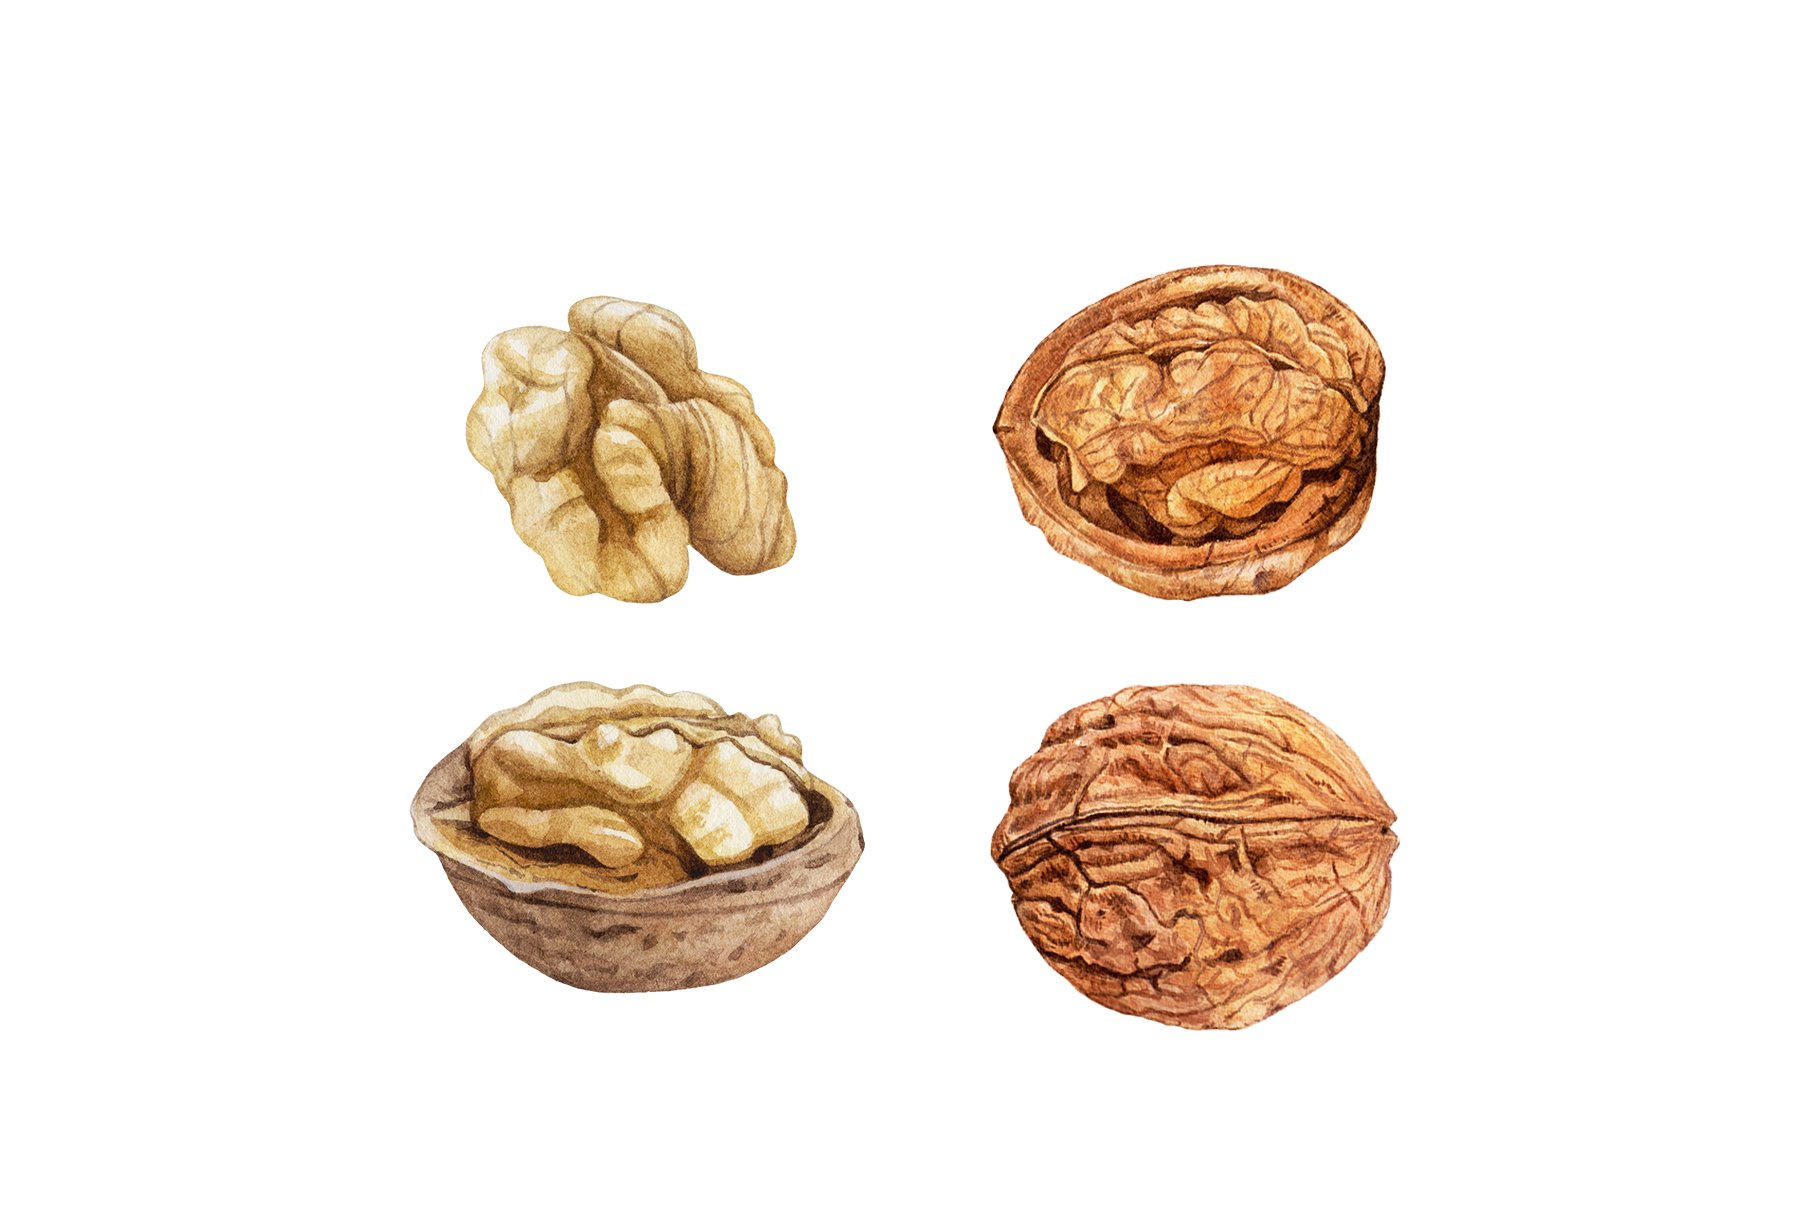 Few conditions of the walnut.